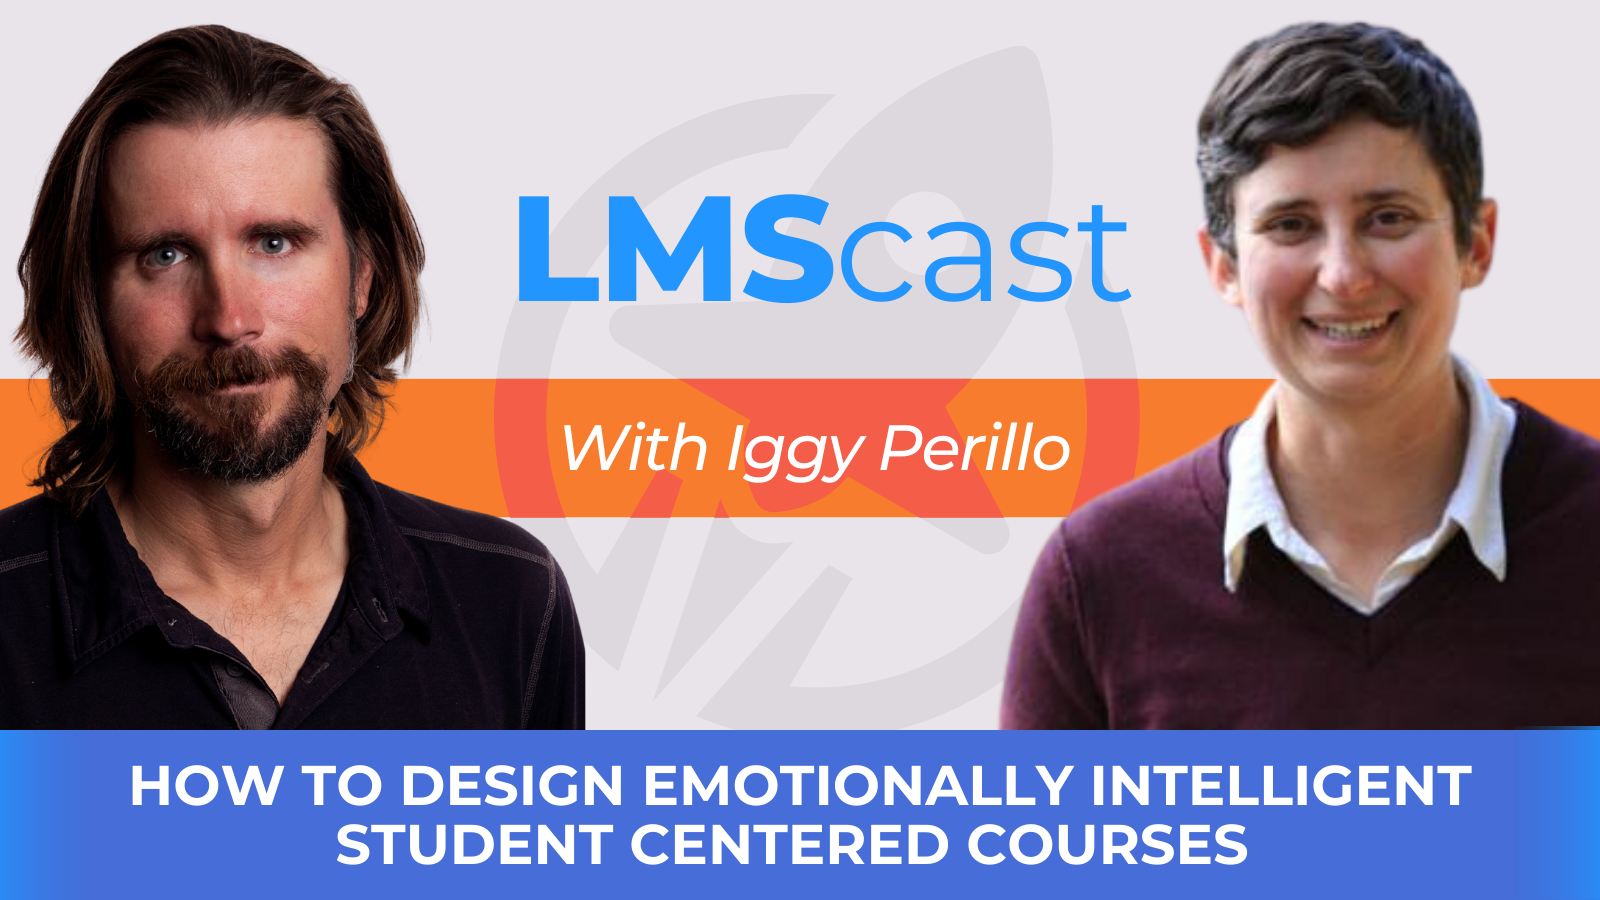 How to Design Emotionally Intelligent Student Centered Courses with Iggy Perillo